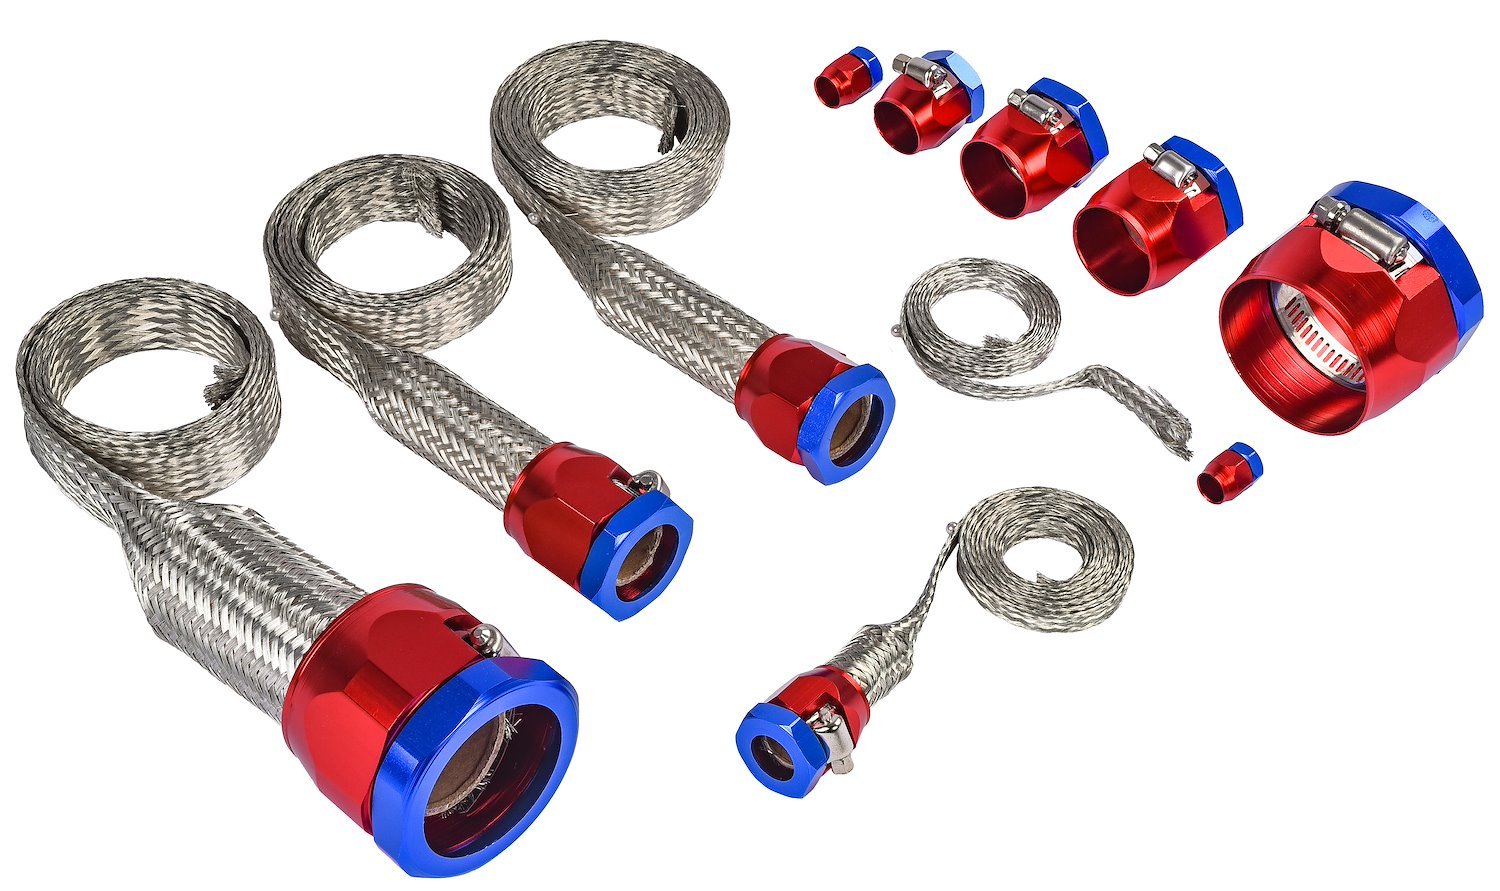 Stainless Steel Braide Engine Vacuum Heater Fuel Line Hose Sleeve Clamps  Kit Red